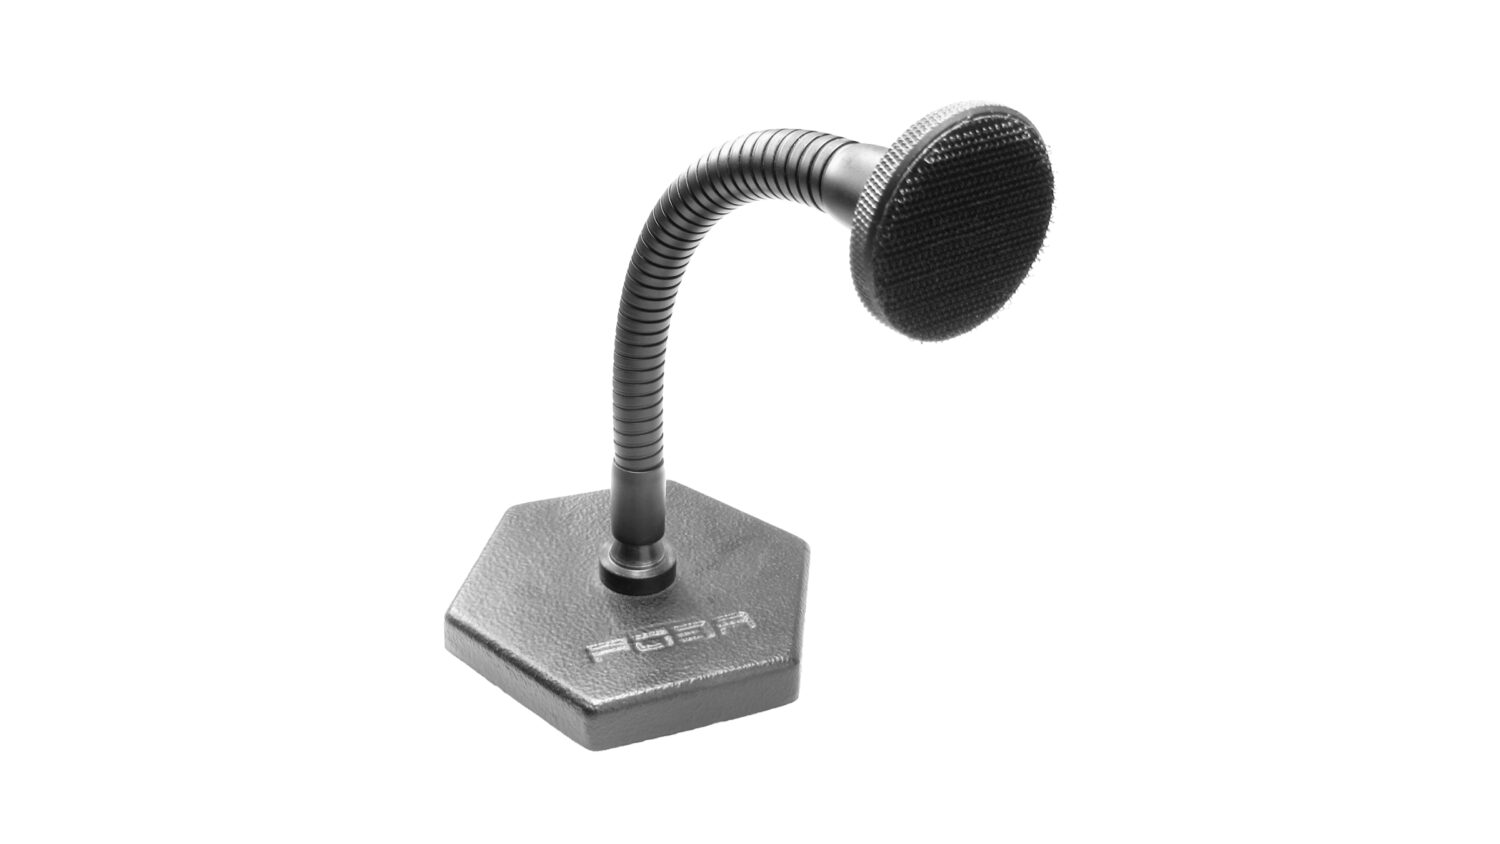 FOBA holder kit with touch fastener and gooseneck arm